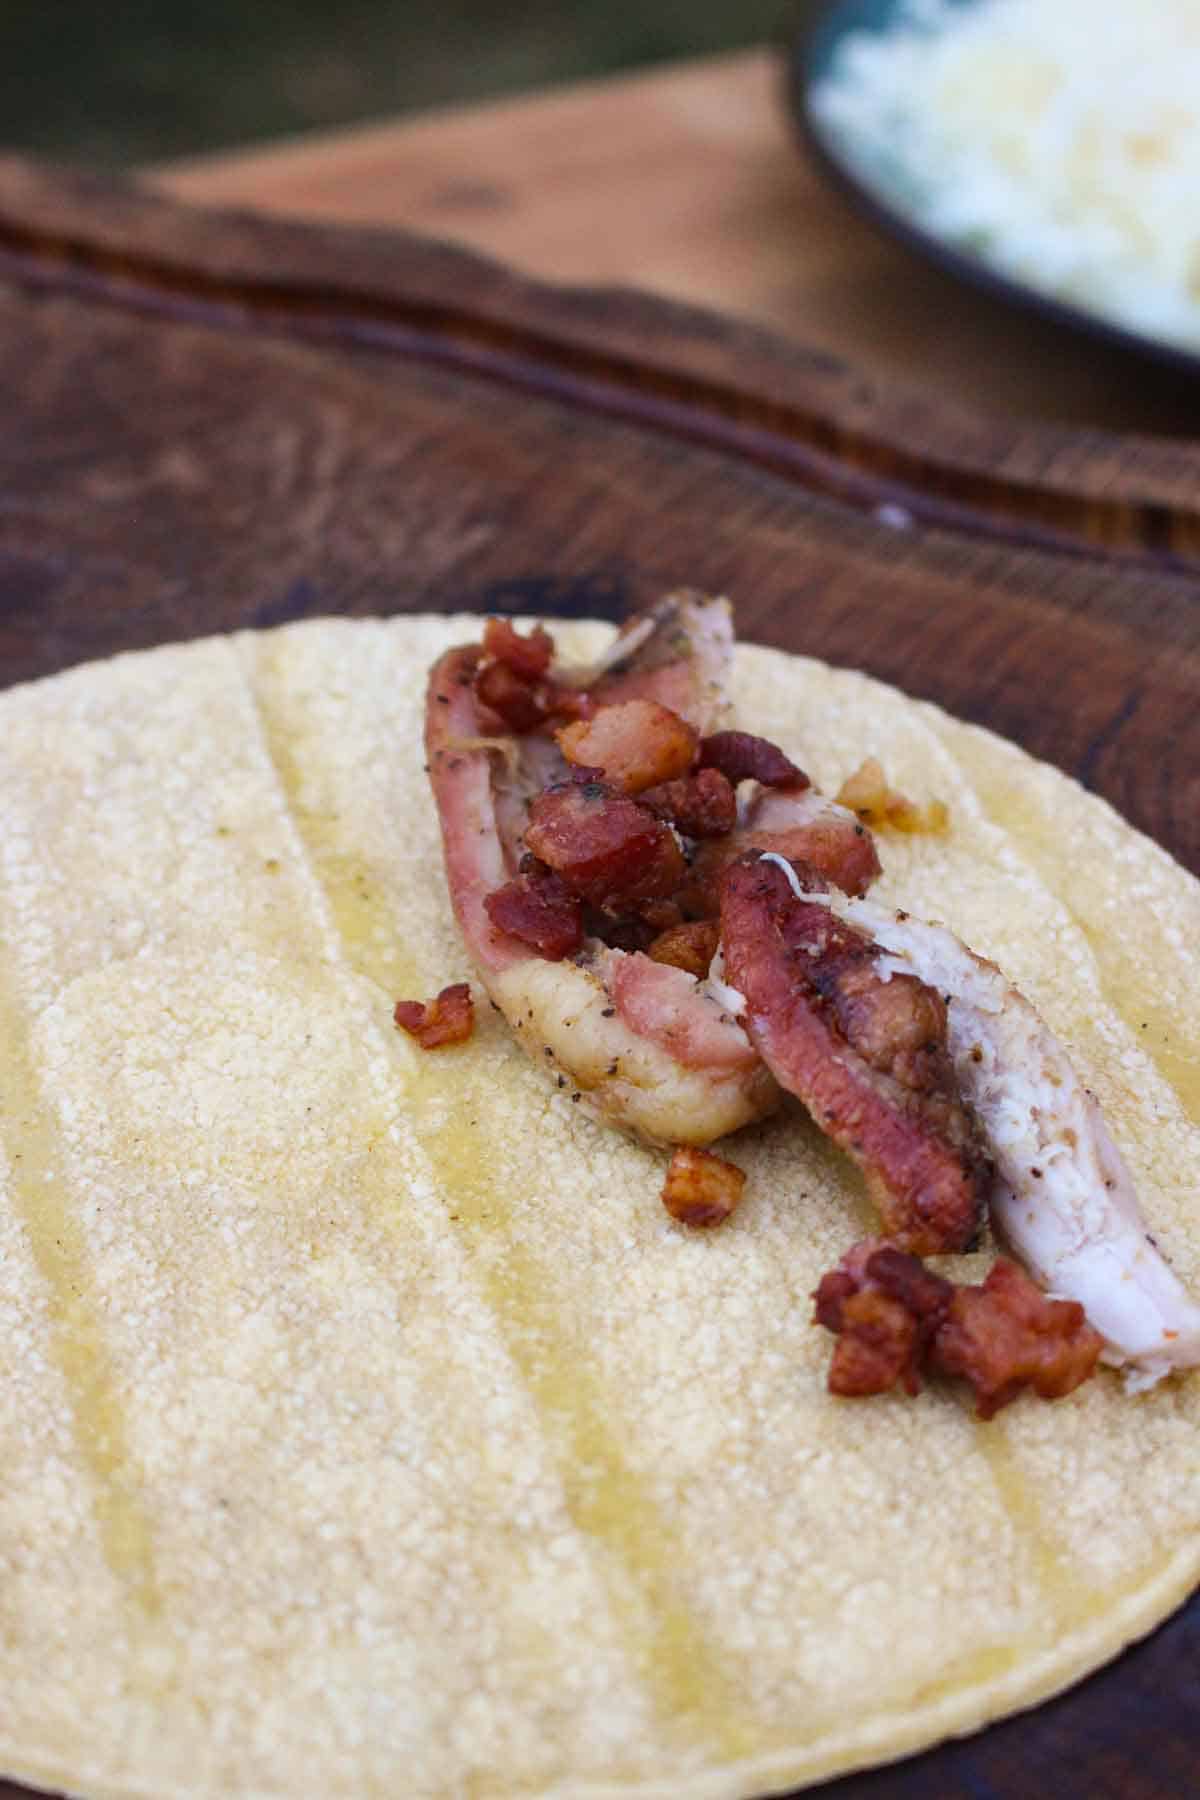 Filling the tortilla with chicken and bacon.